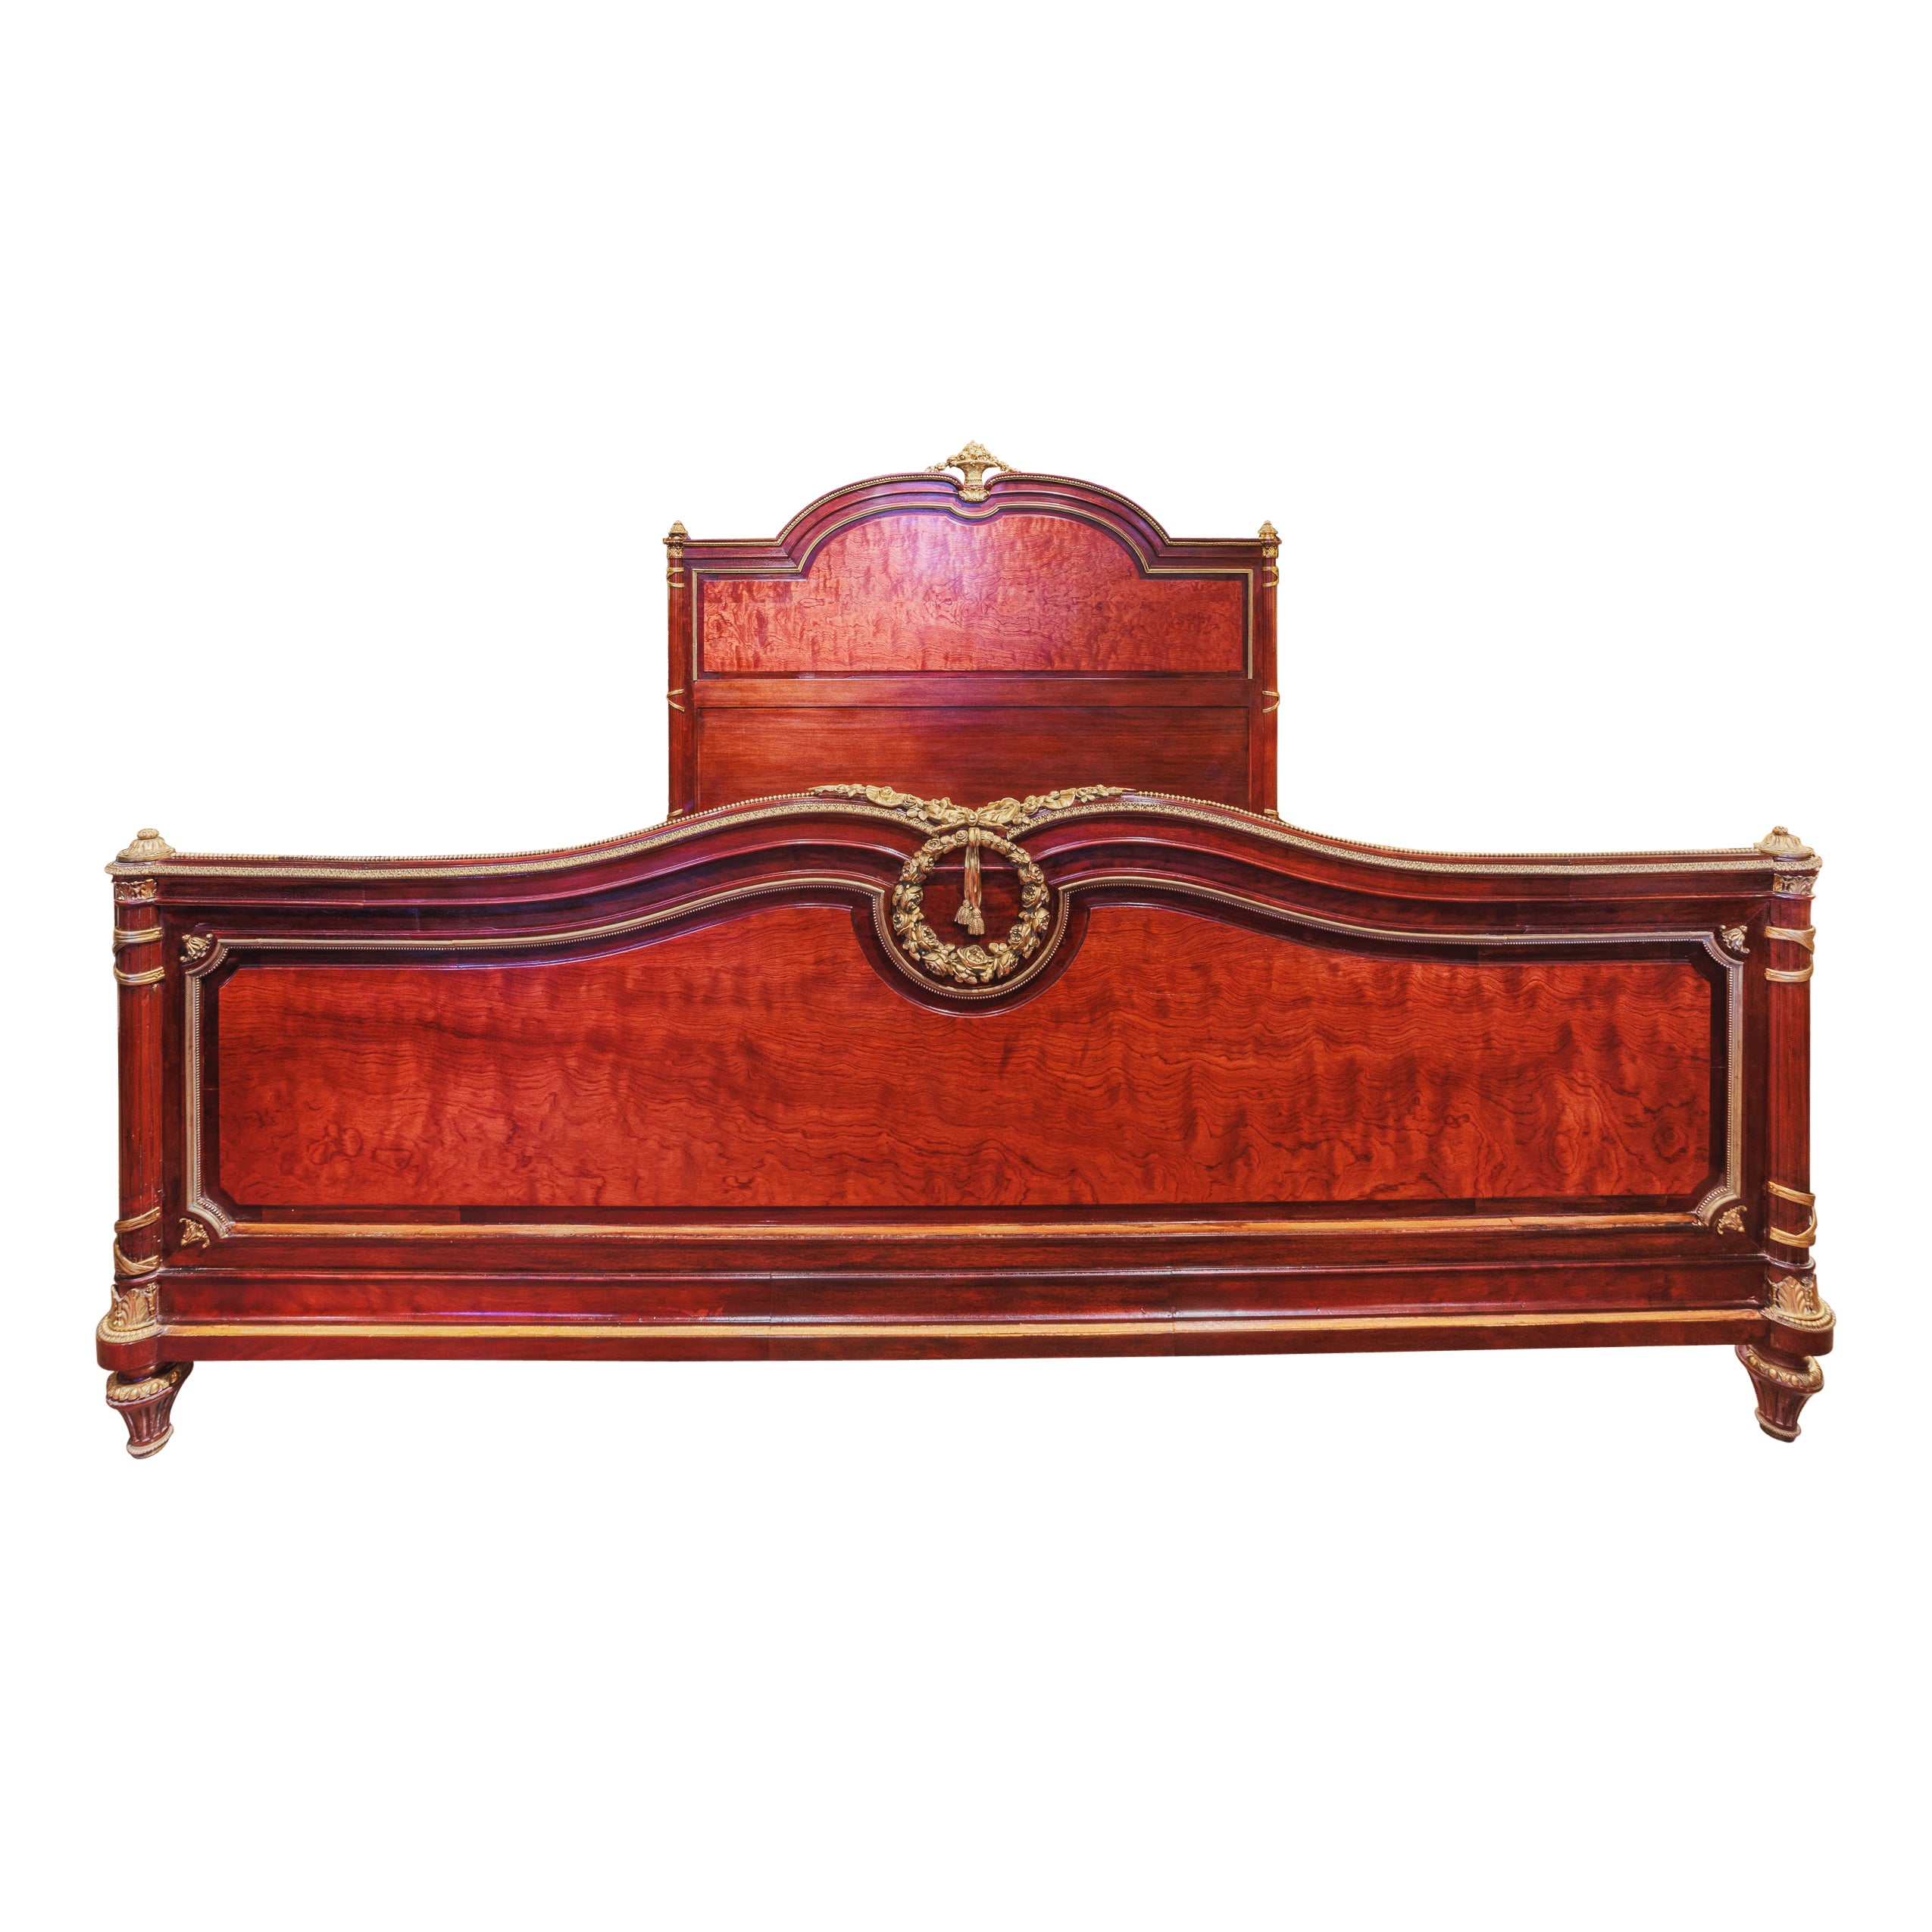 Fine 19th Century French Louis XVI Mahogany and Gilt Bronze Mounted Bed